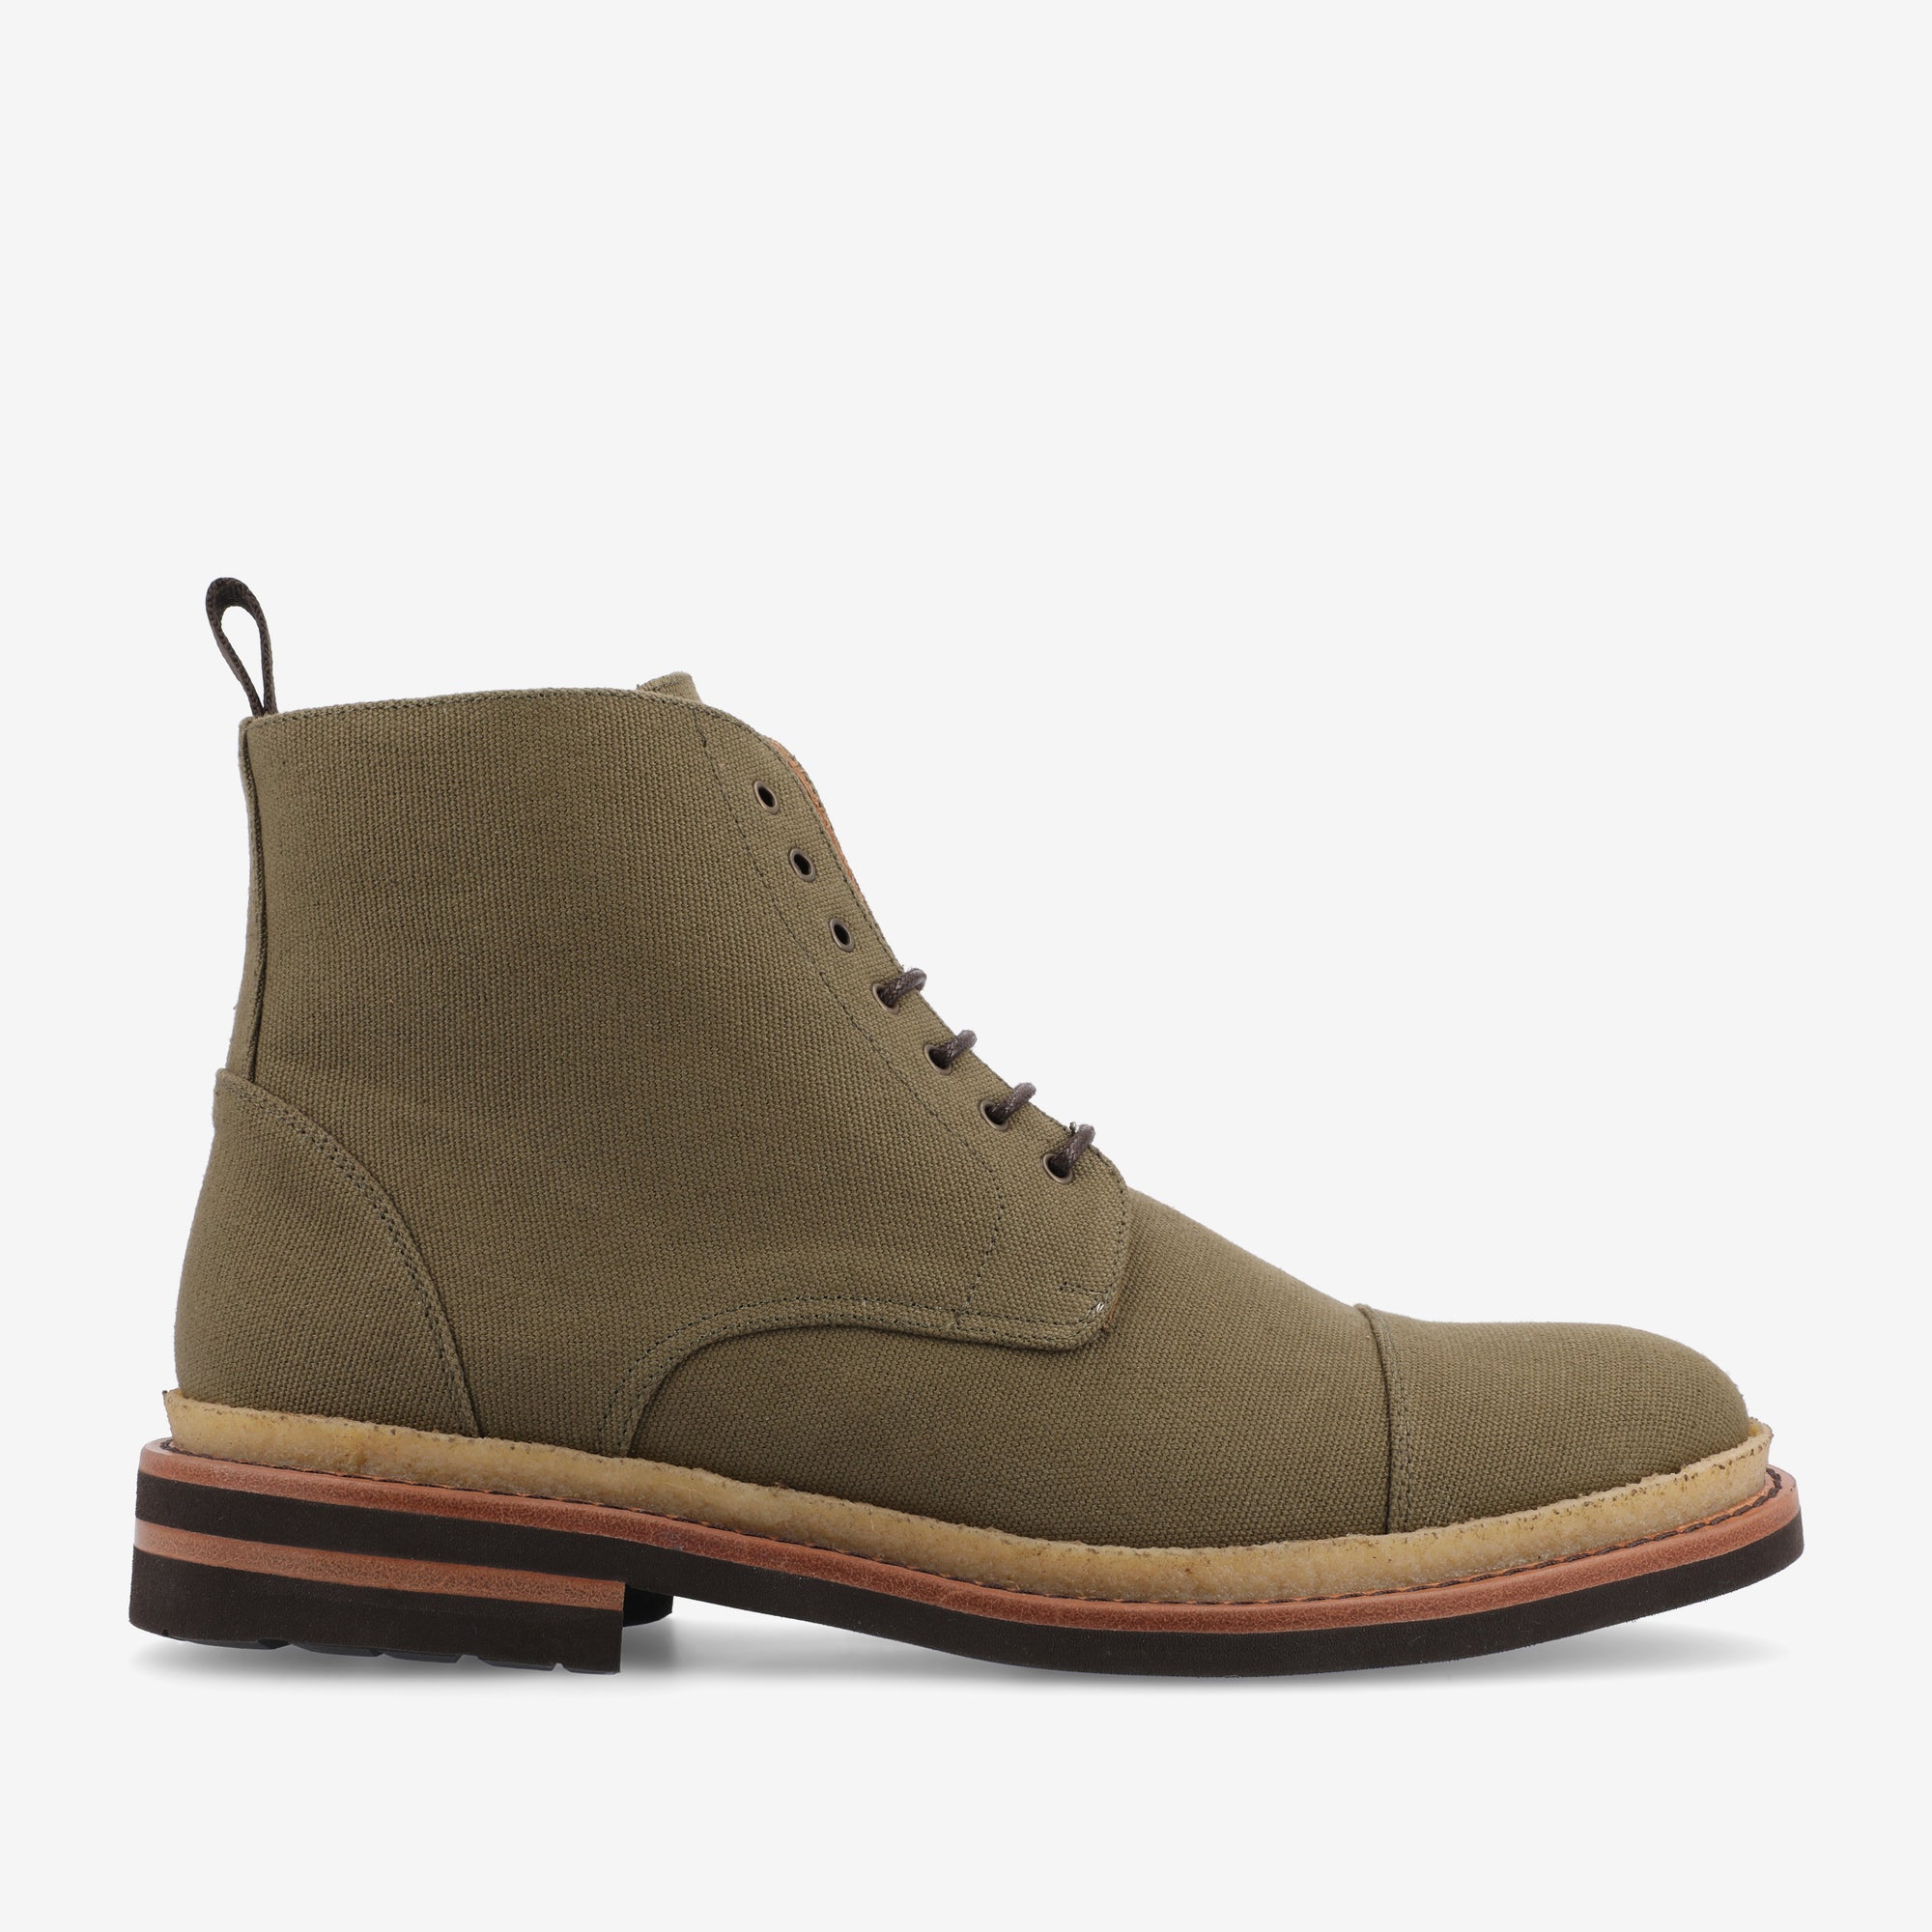 The Jaro Boot in Olive